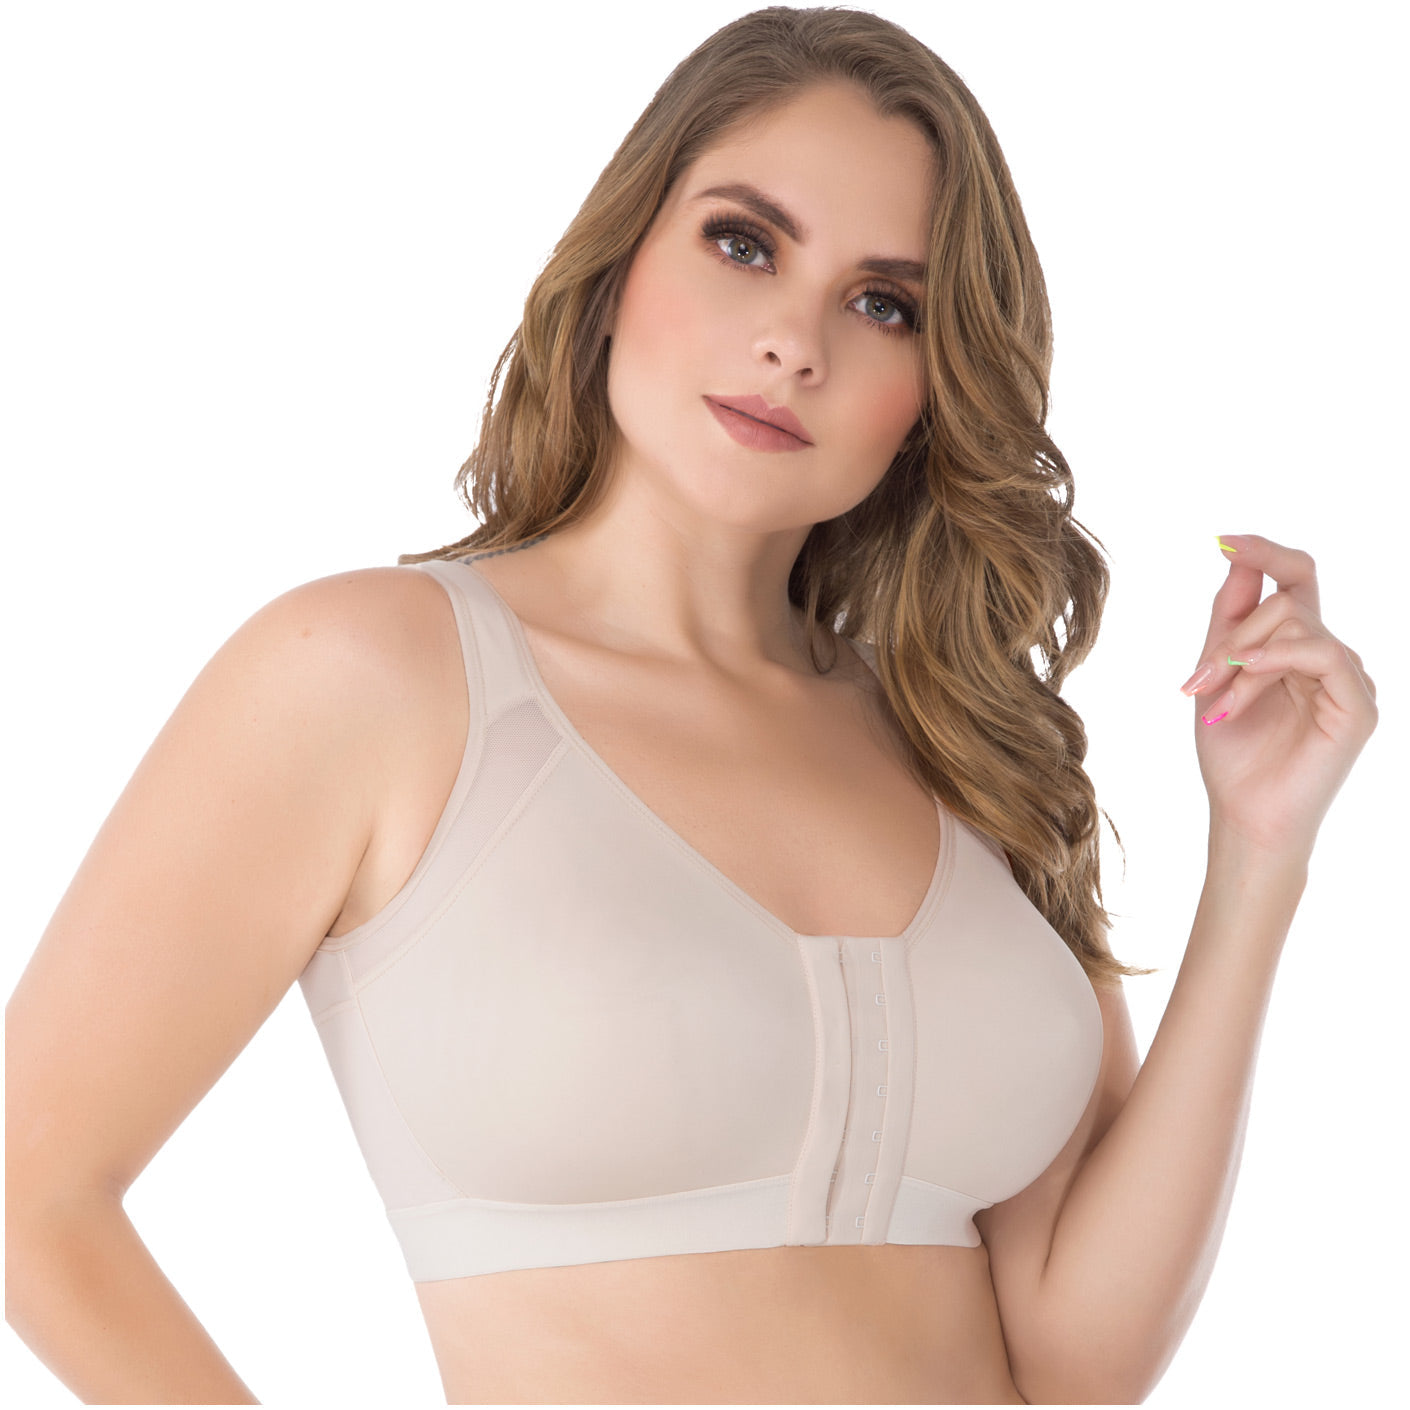 UpLady Extra Firm High Compression Full Cup Bra Ref 8532 (B, Beige, 32) at   Women's Clothing store